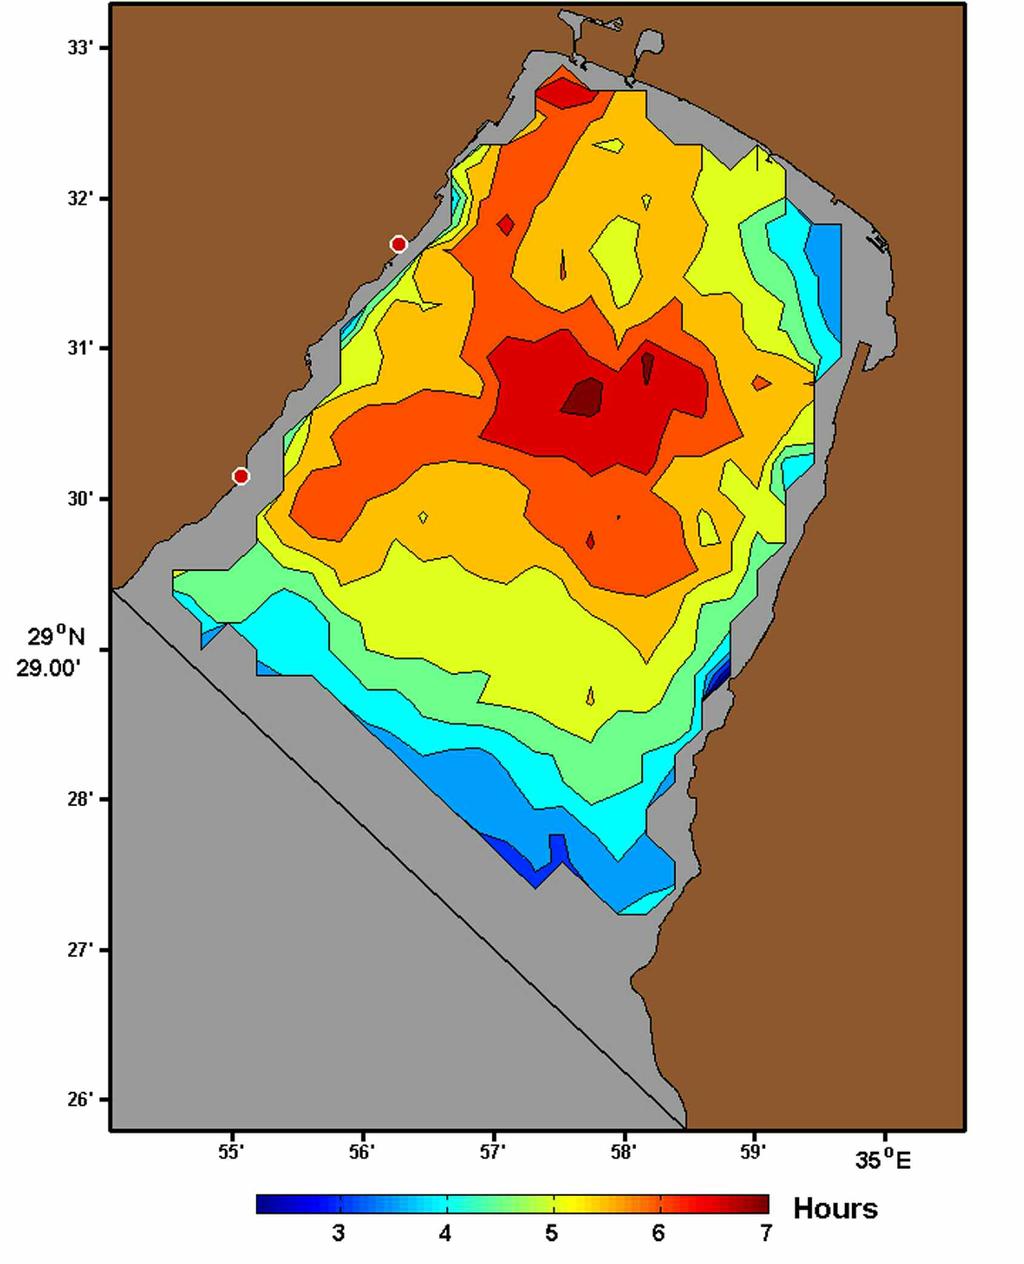 Fig. 4. Color contours of mean 500-m separation times (in hours) for the Gulf of Eilat in September 2005. The largest separation times occur in the center of the Gulf and in the northwest corner.